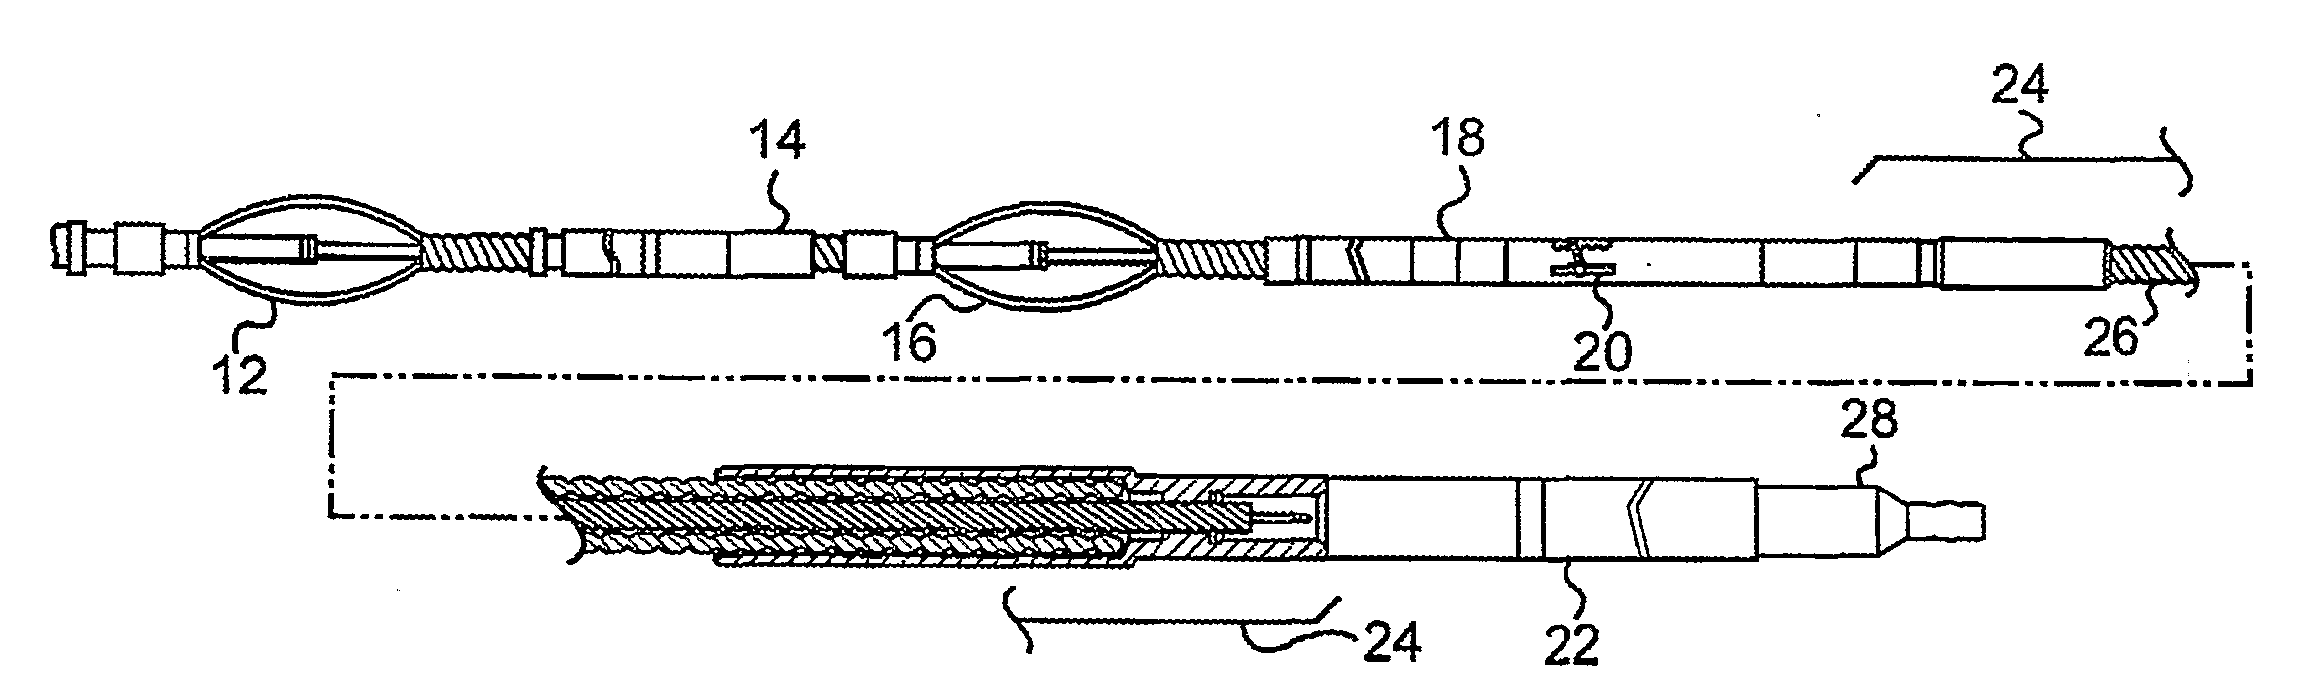 Flexible Sinker Bar With Electrically Conductive Wires